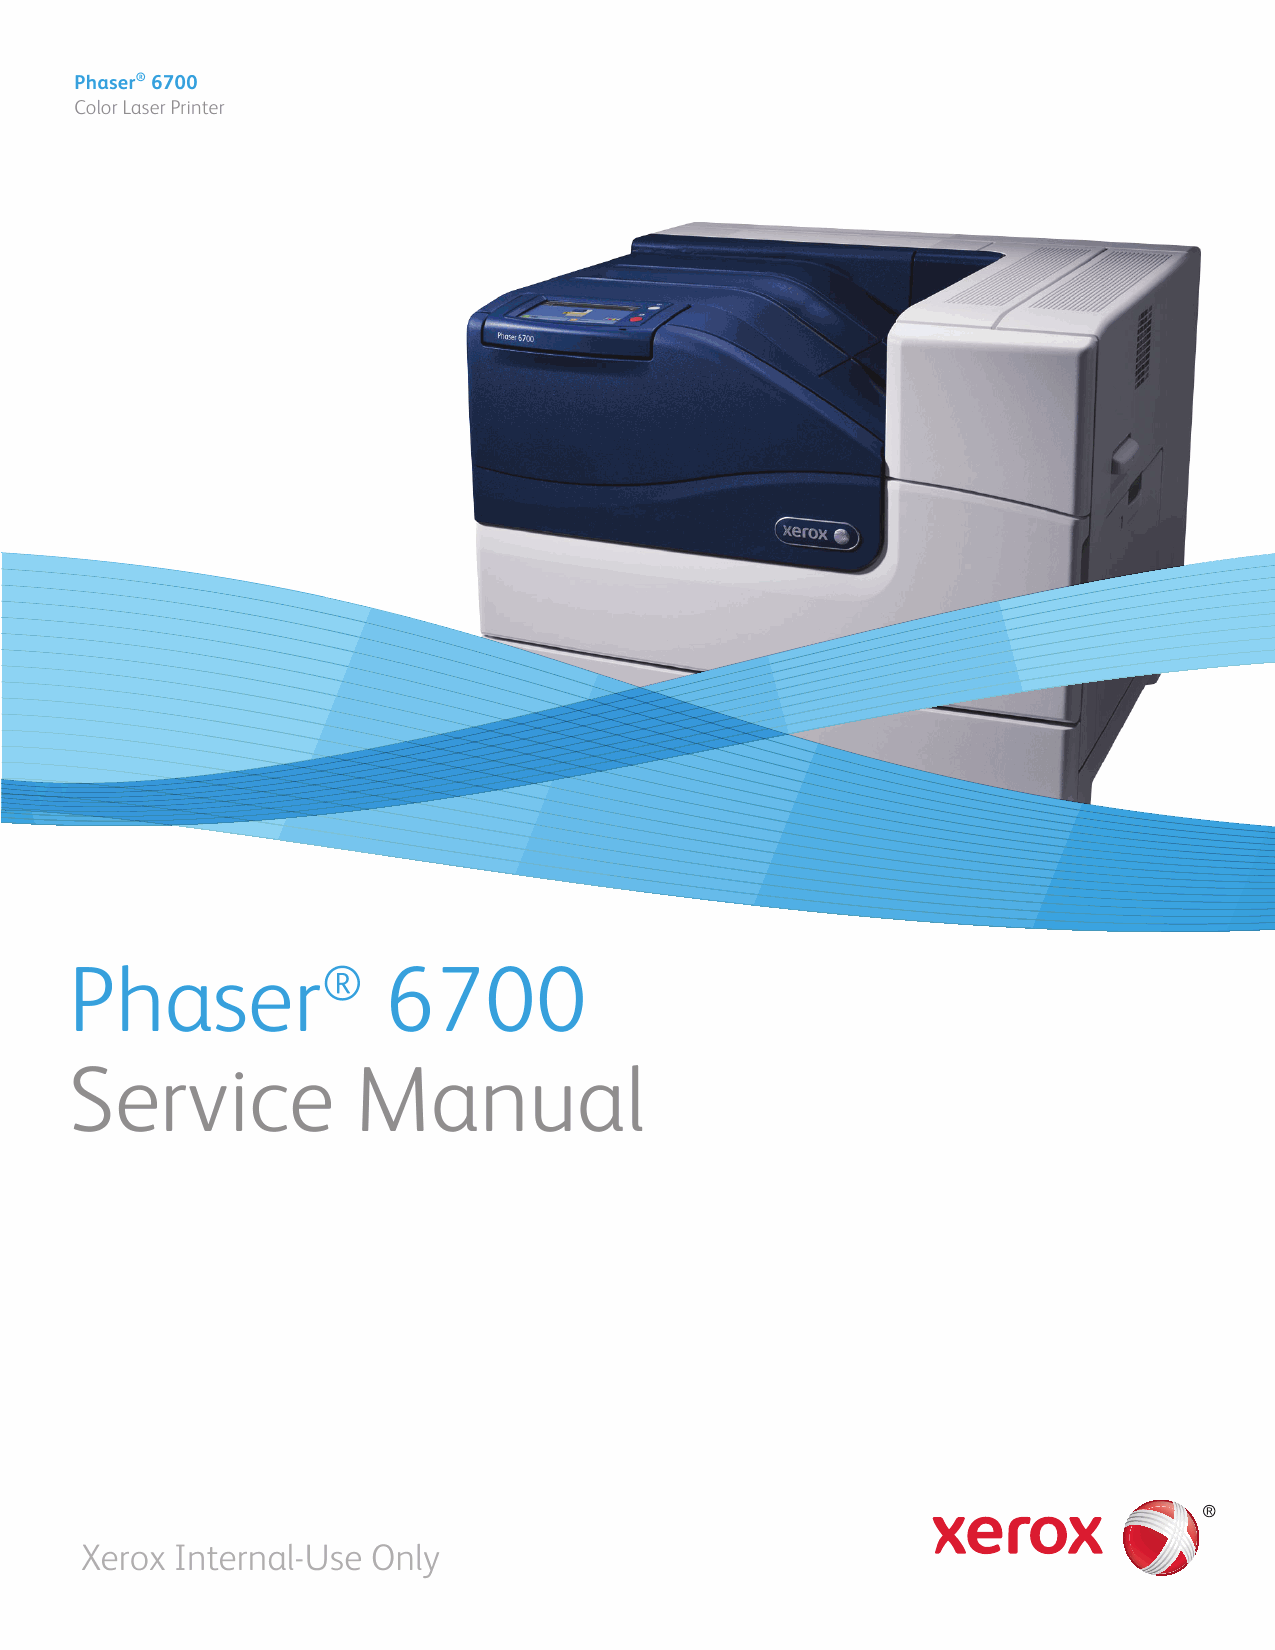 Xerox Phaser 6700 Parts List and Service Manual-1